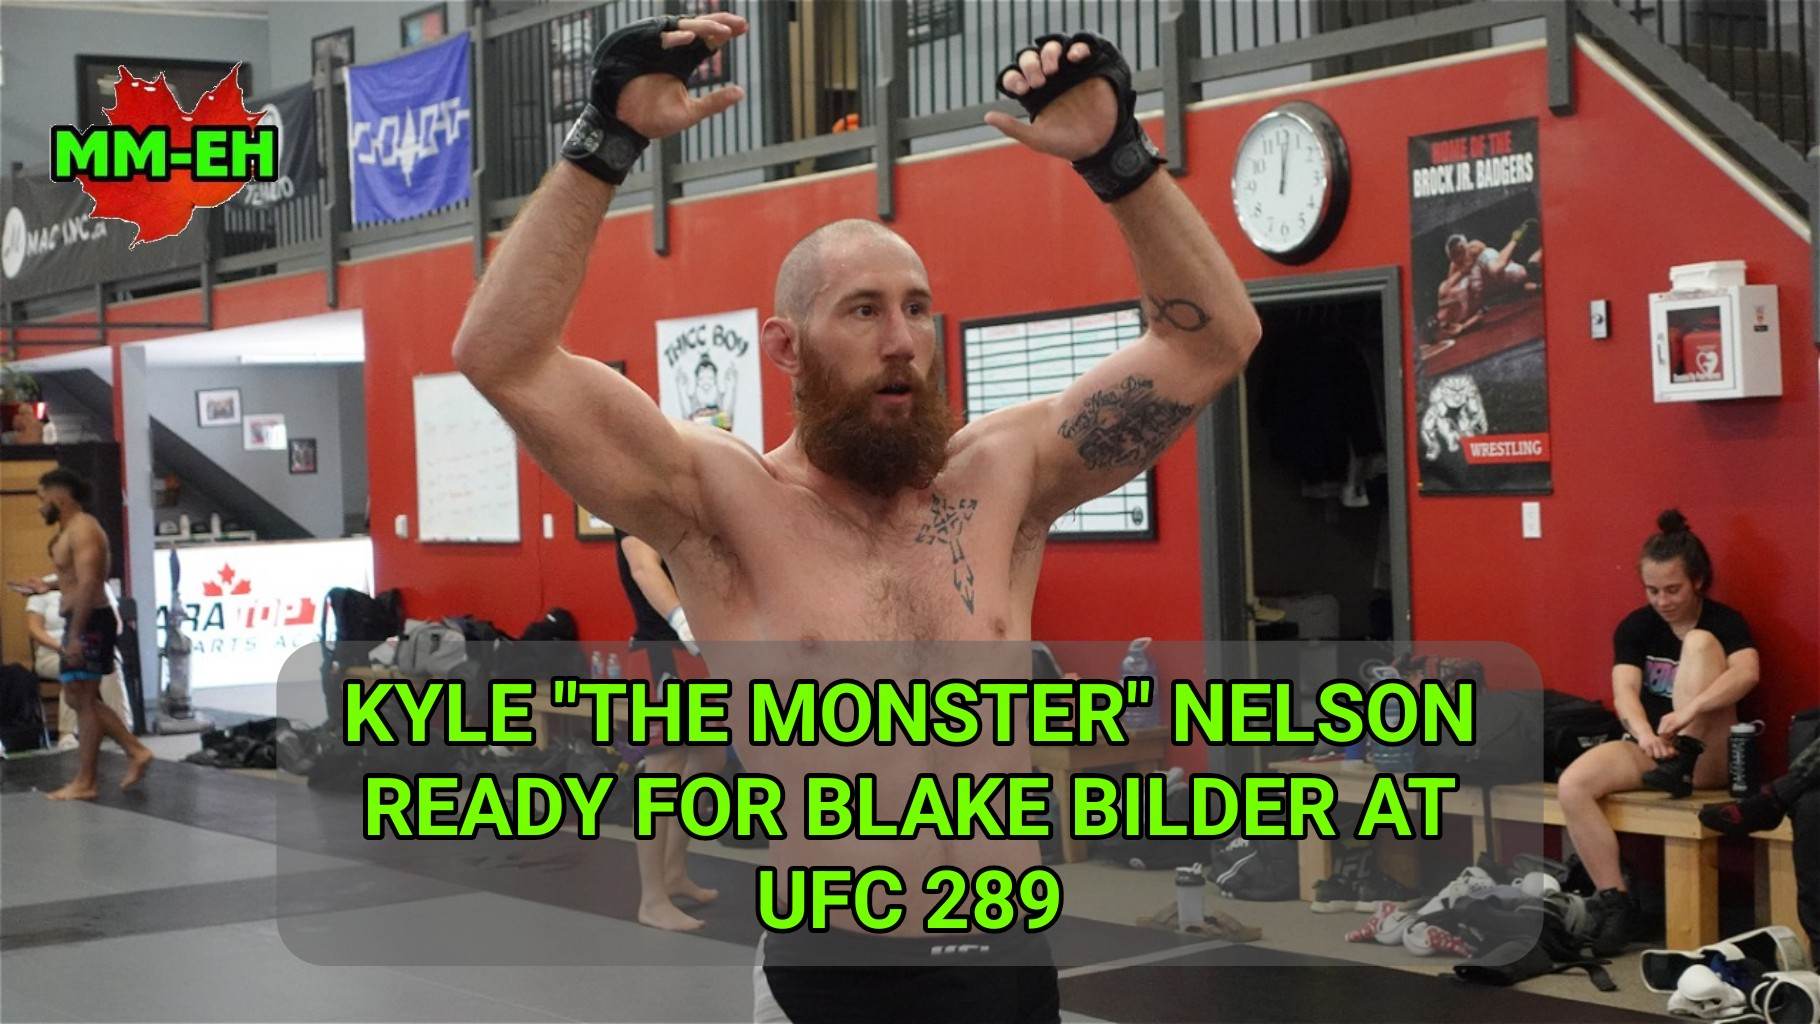 VIDEO: Kyle Nelson Knows How To Beat Blake Bilder At UFC 289 In Vancouver MM EH